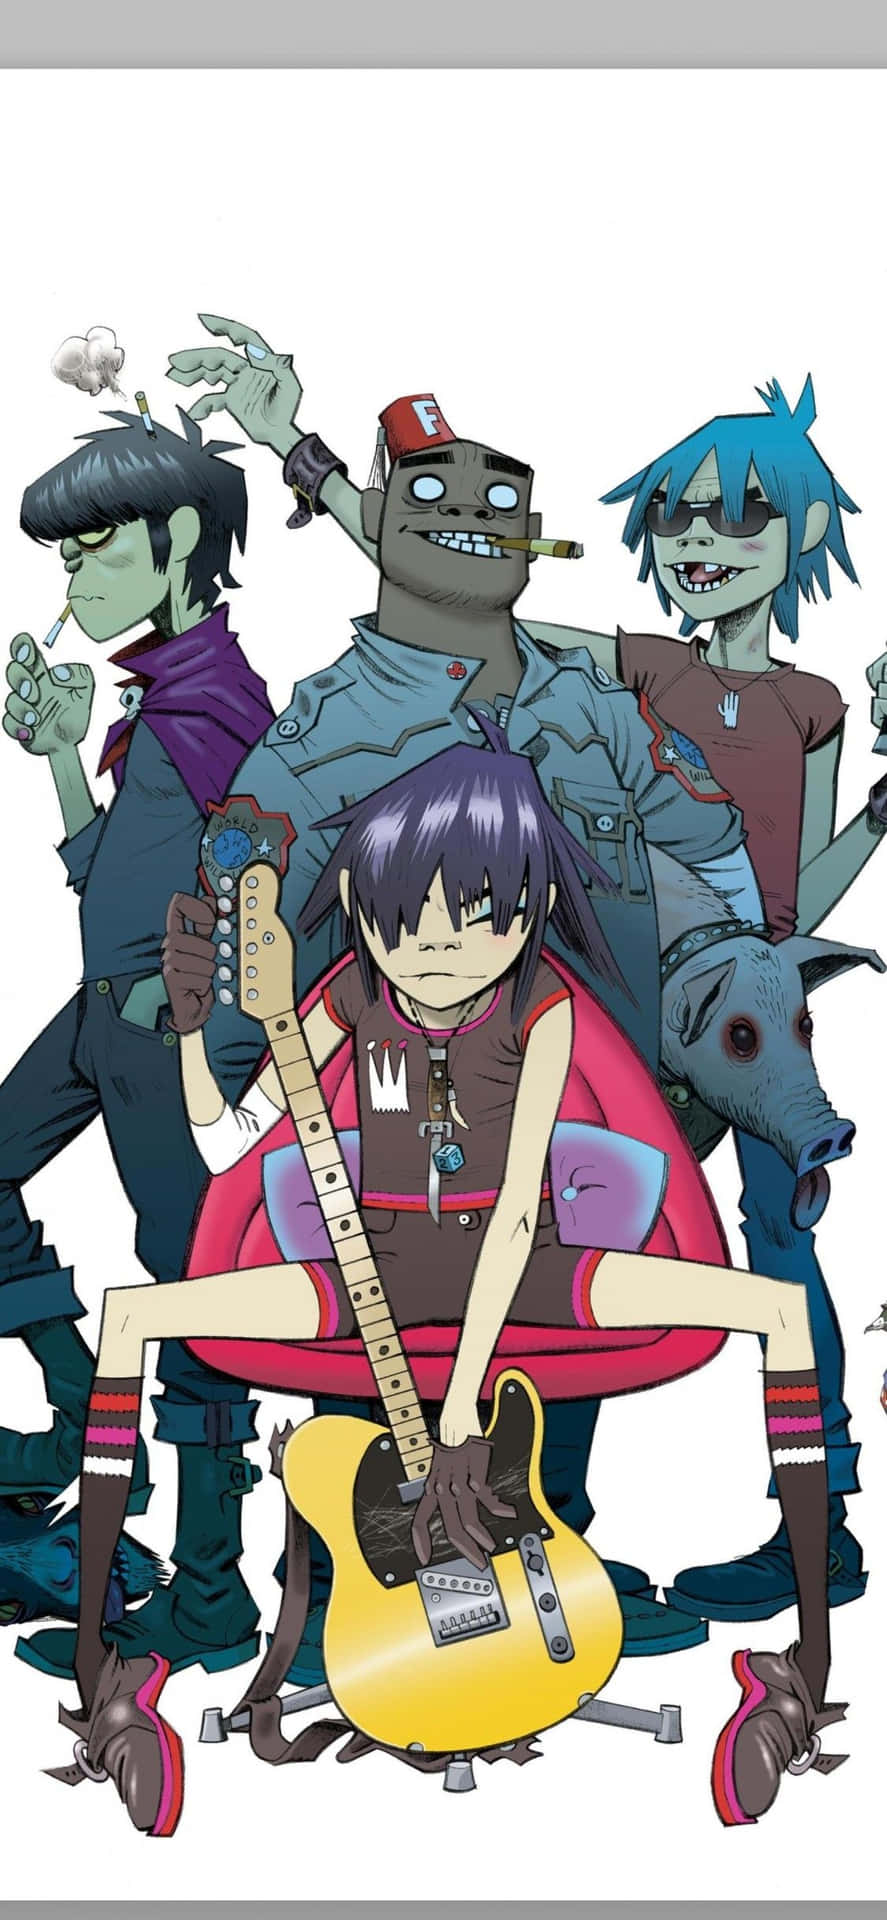 Gorillaz Iphone Band Members Noodle At The Center Background